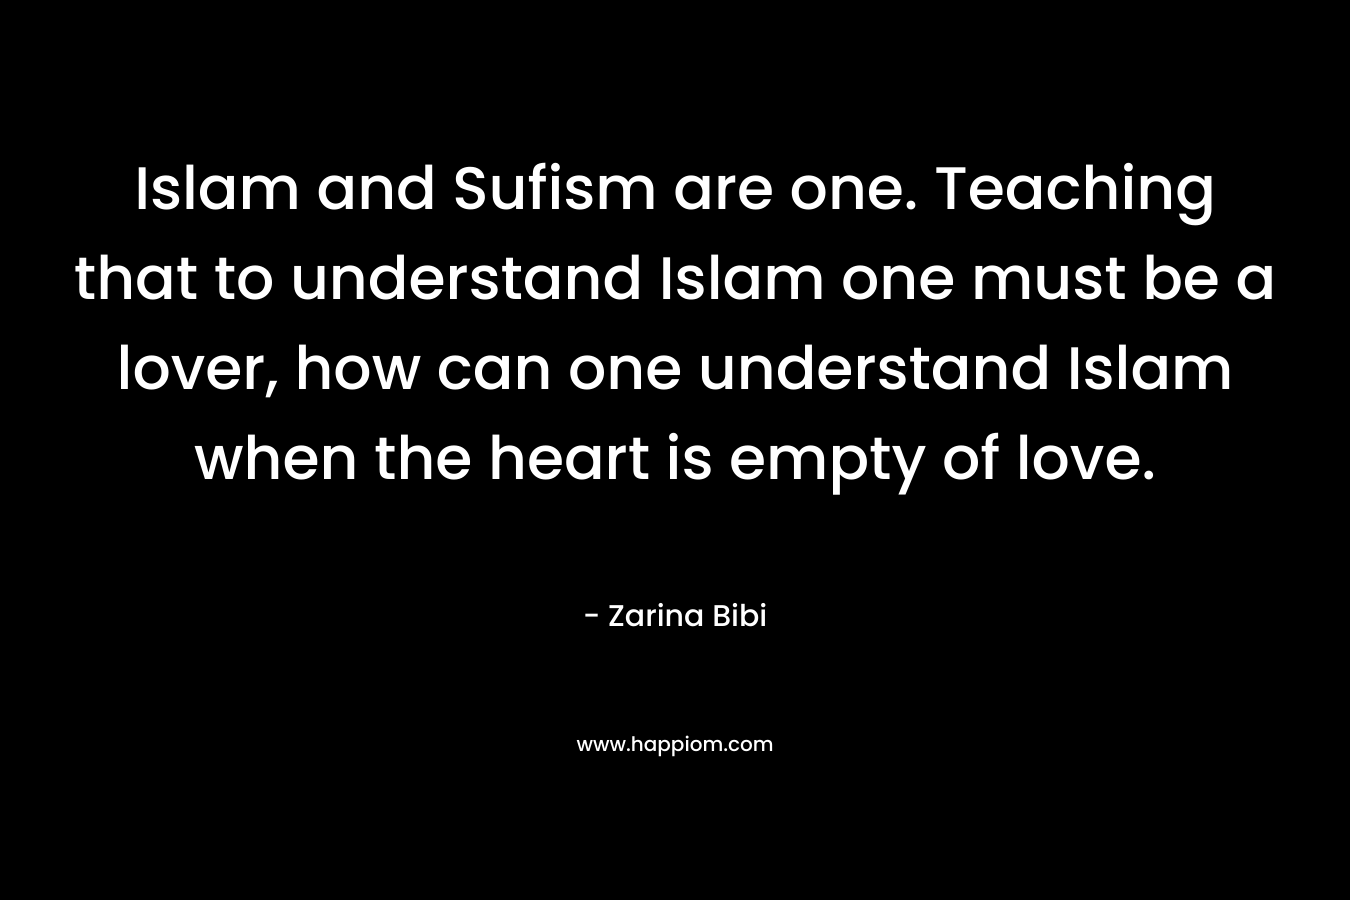 Islam and Sufism are one. Teaching that to understand Islam one must be a lover, how can one understand Islam when the heart is empty of love.